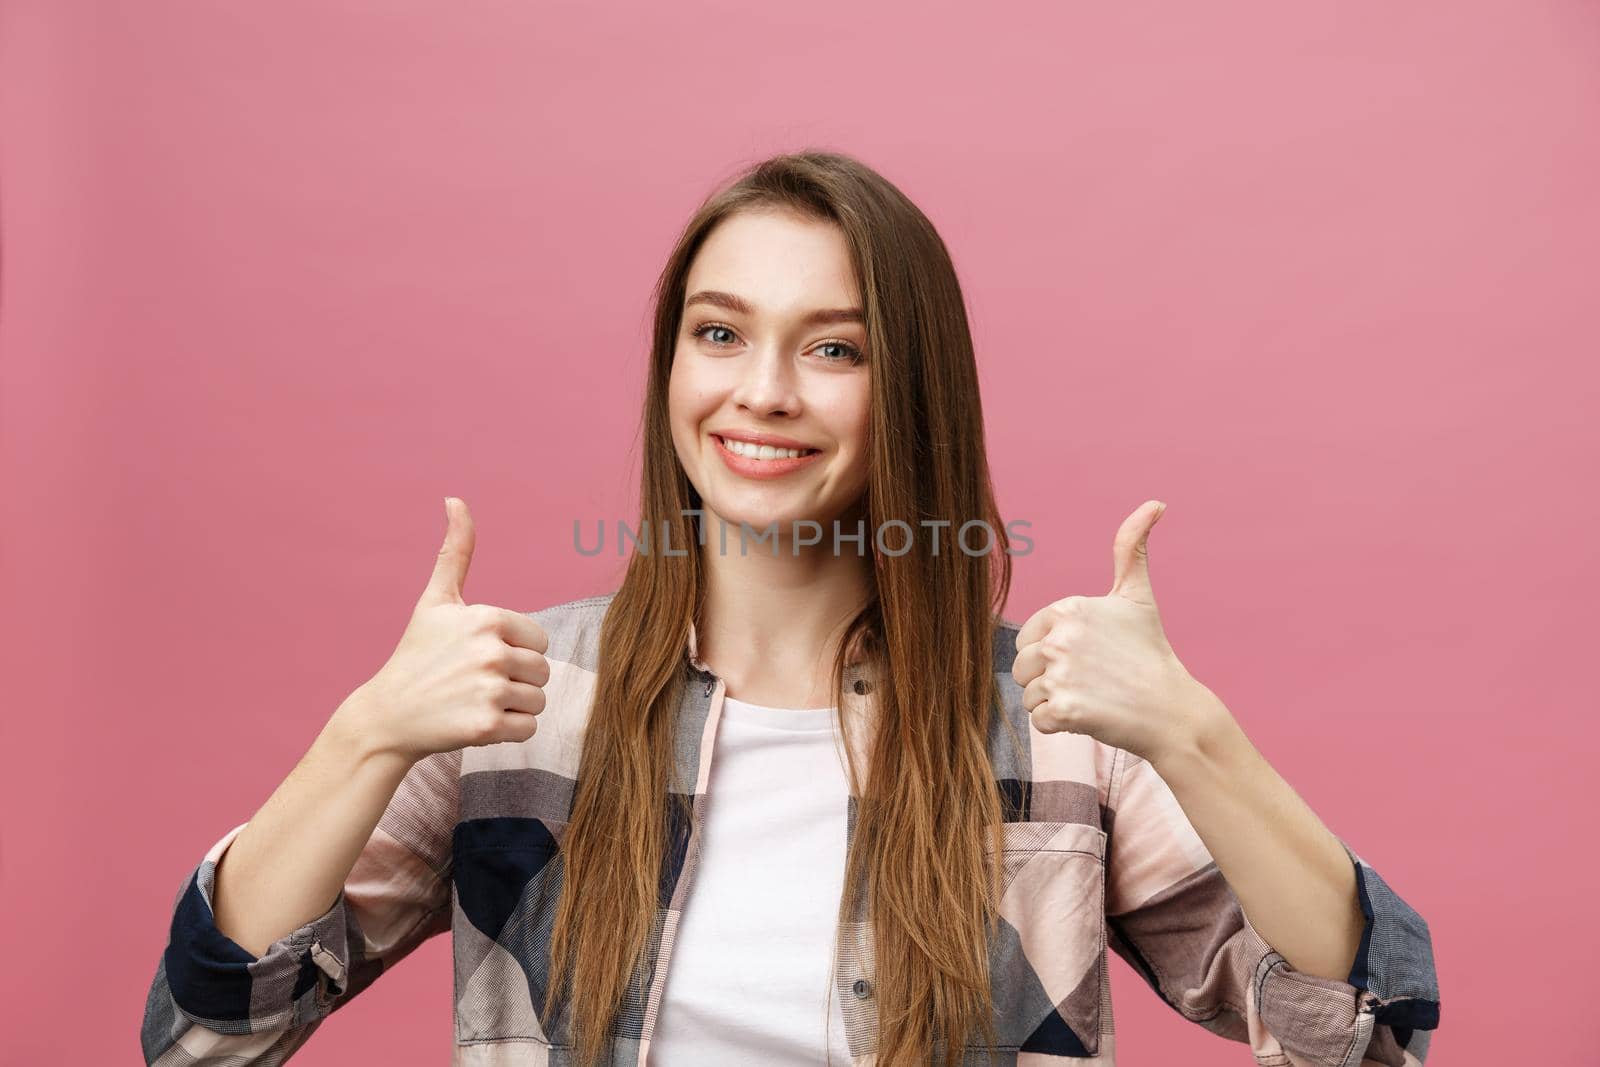 Close-up shot of smiling pretty girl showing thumb up gesture. Female isolated over pink background in the studio